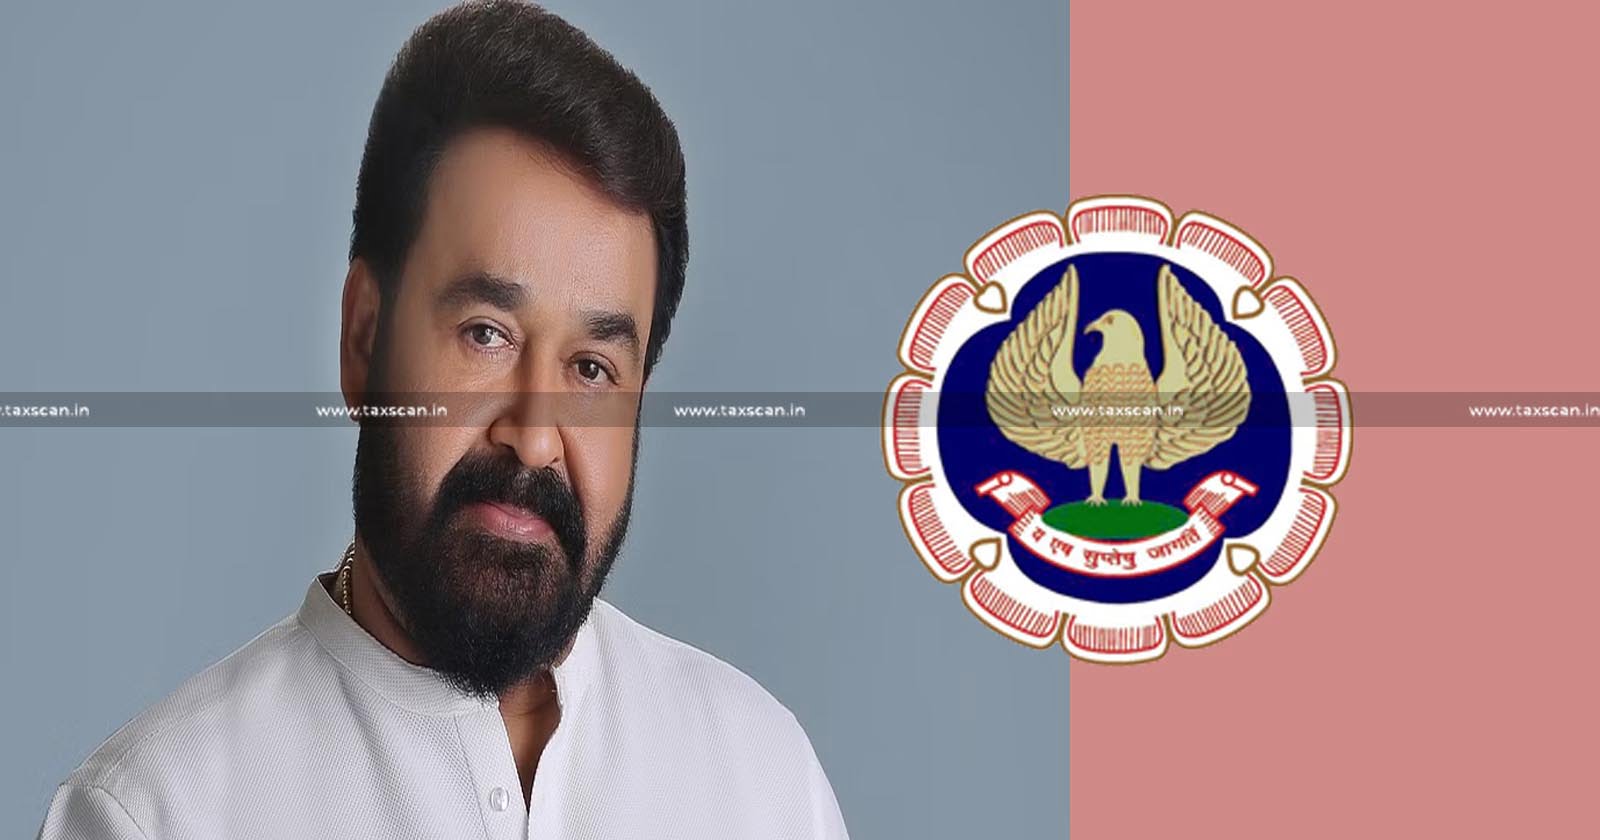 False Claim of CA Coaching Institute - Actor Mohanlal Responds to ICAI Letter -CA Coaching Institute - ICAI Letter -Mohanlal - Malayalam Actor Mohanlal - ICAI - Endorsement - mohanlal reply - Mohanlal ICAI - taxscan